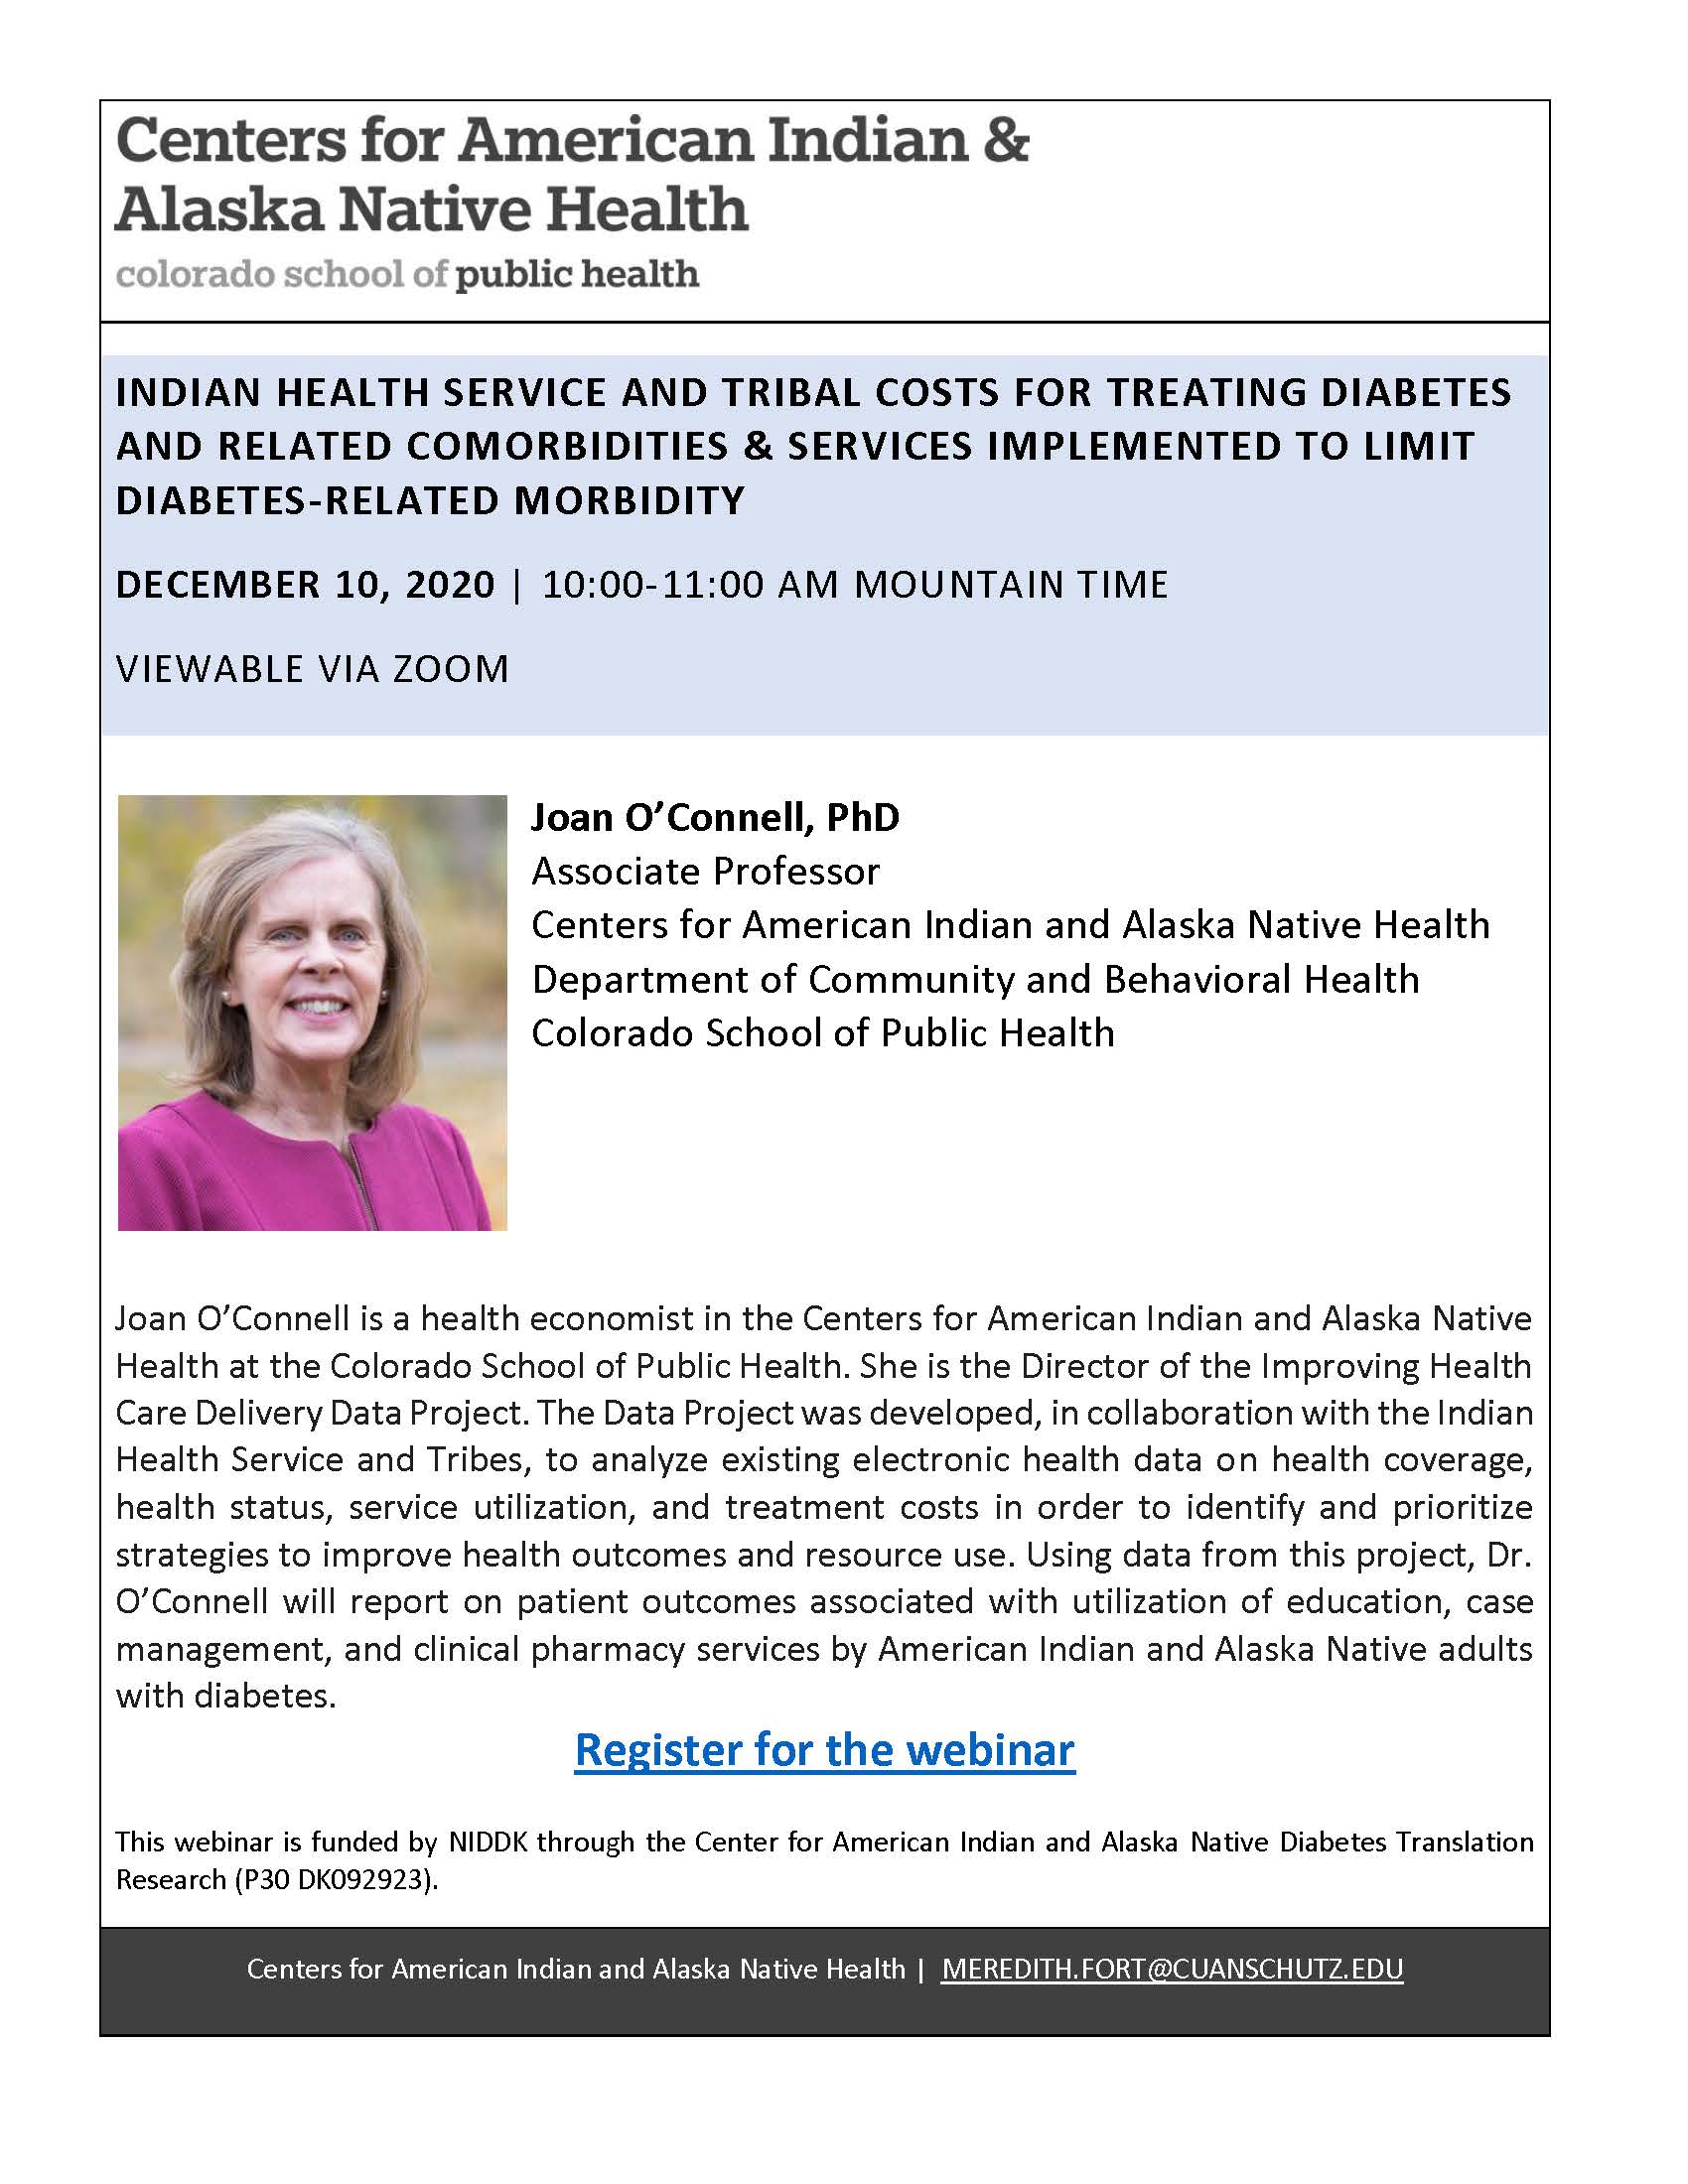 Flyer for CDTR Webinar about the Costs of Treating Diabetes on Dec. 10, 2020